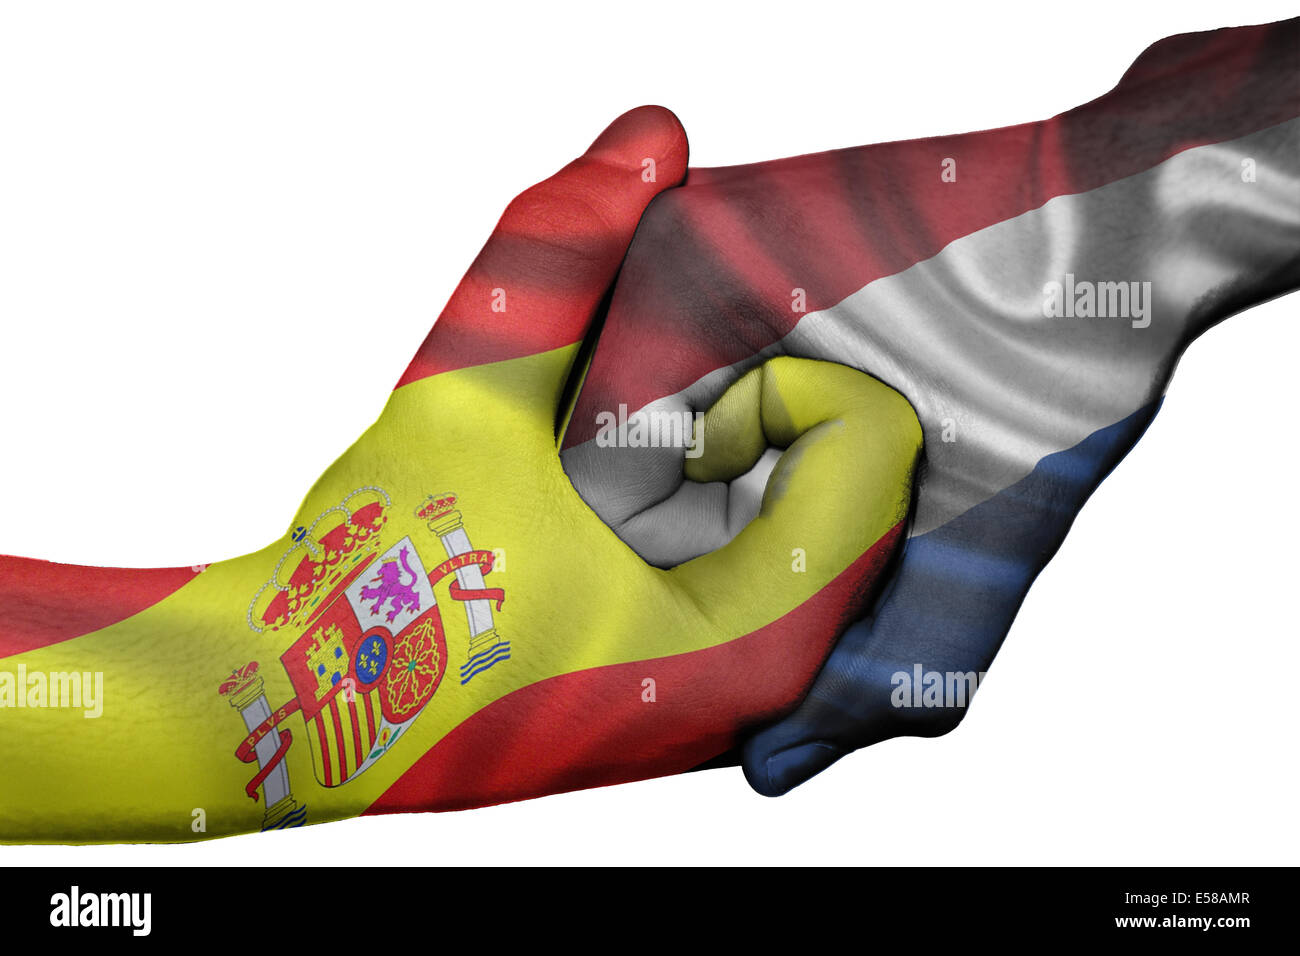 Diplomatic handshake between countries: flags of Spain and Netherlands overprinted the two hands Stock Photo